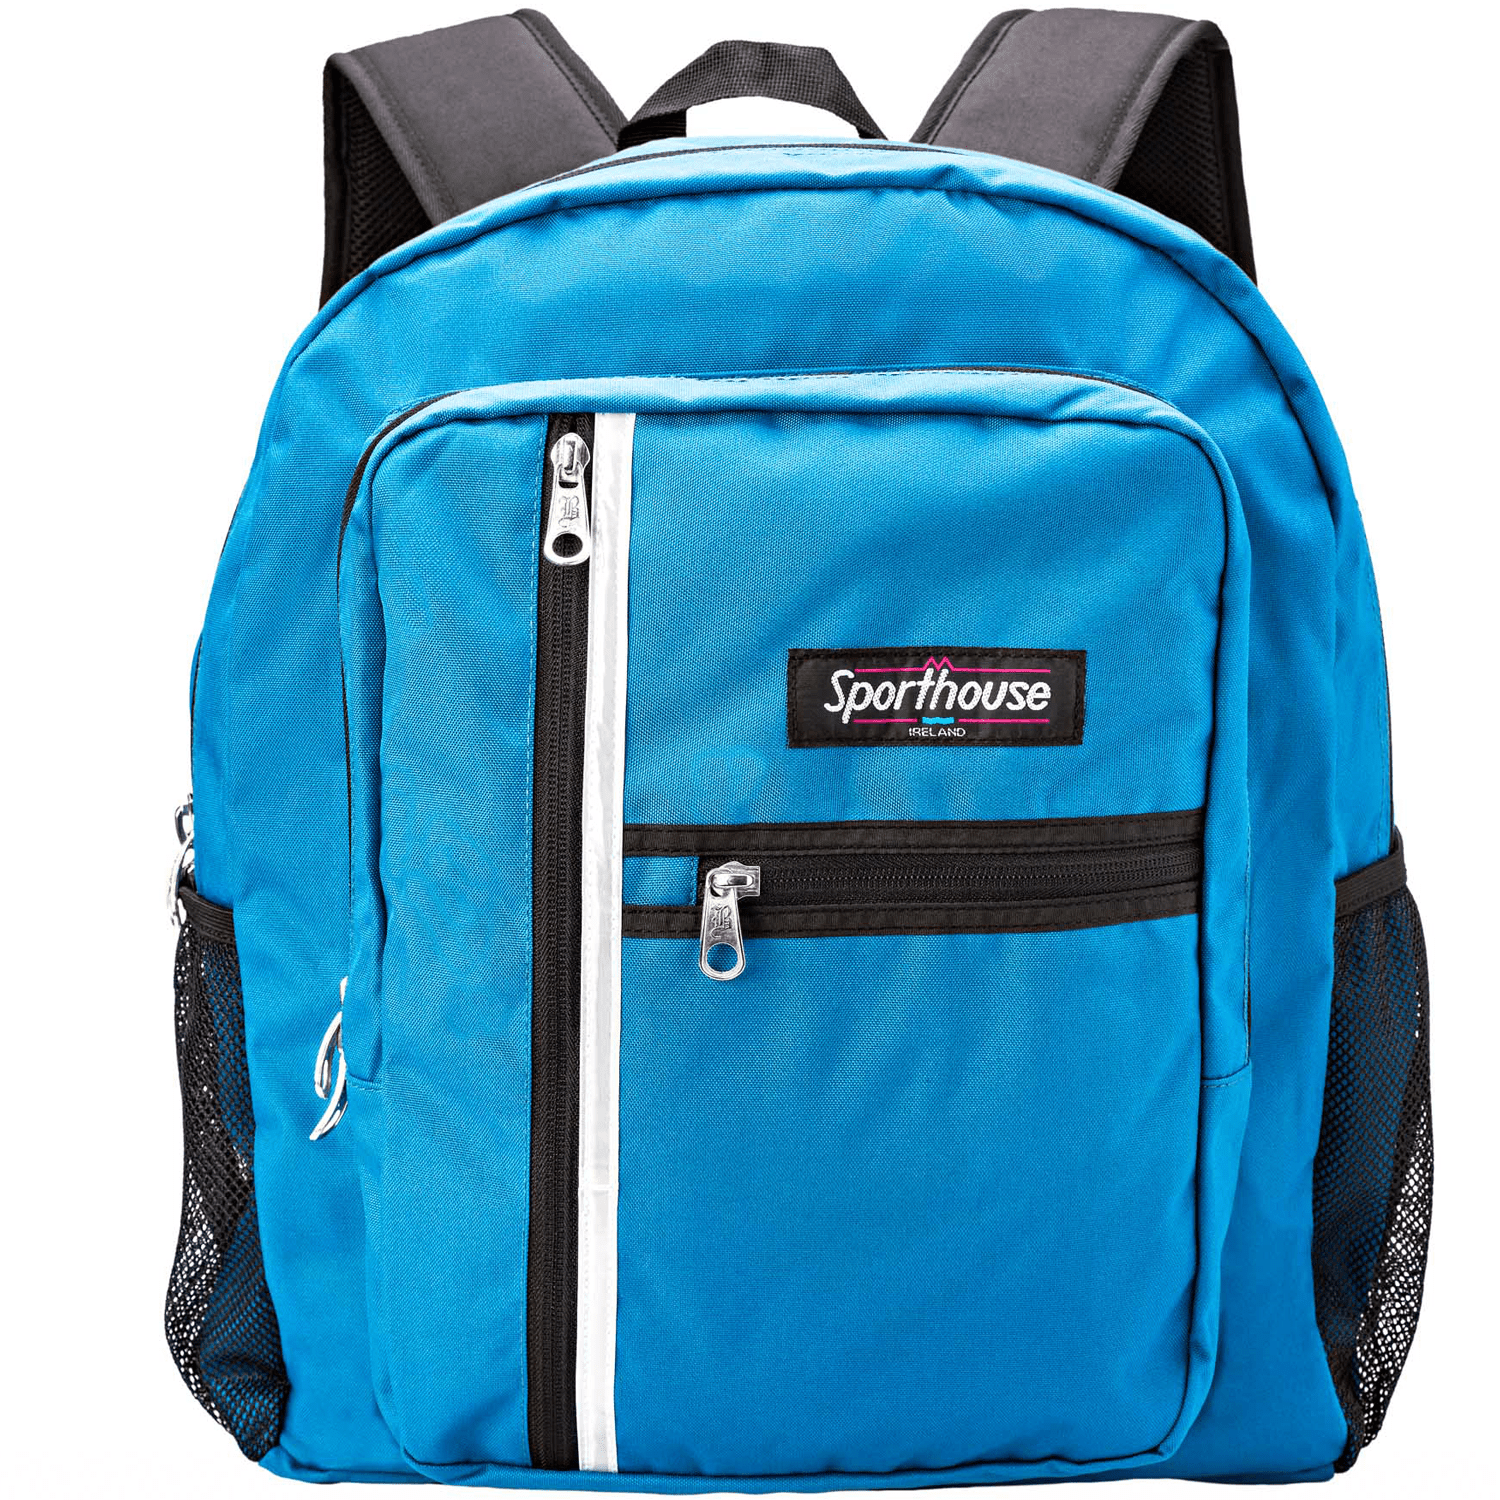 Sporthouse Student 2000 42L Backpack - Blue 1 Shaws Department Stores